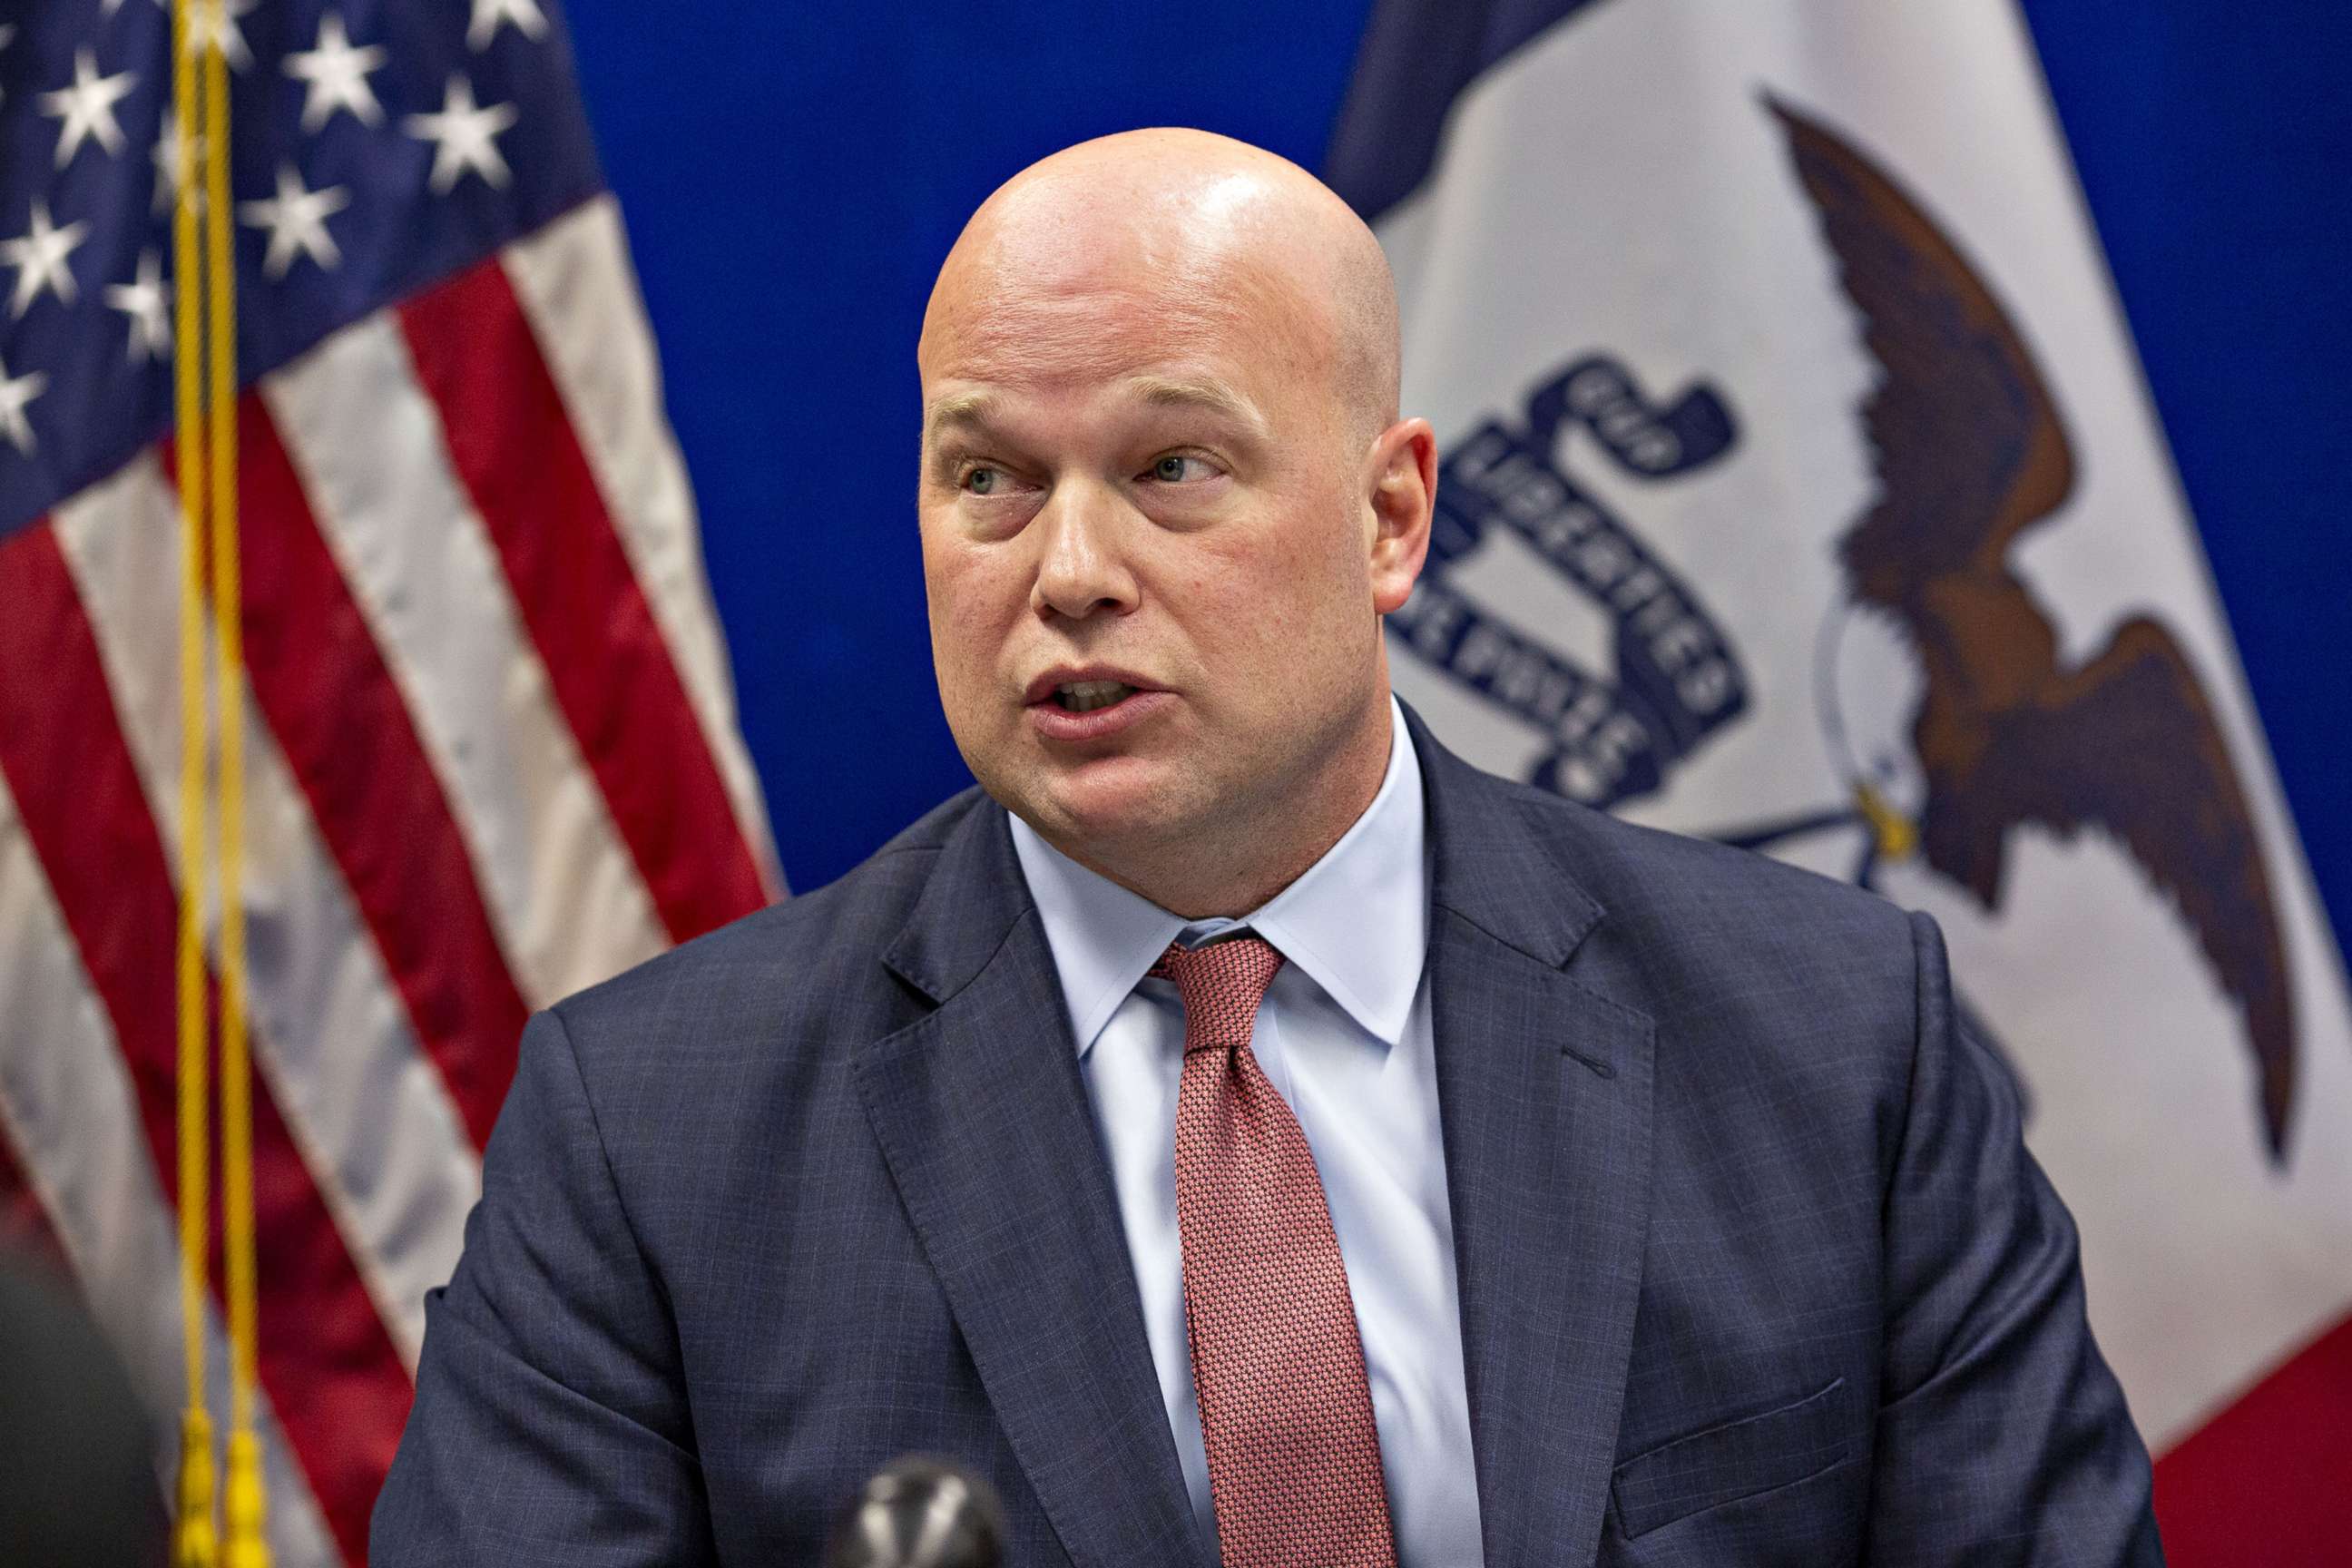 PHOTO: Matthew Whitaker, acting U.S. attorney general, speaks during a meeting with local law enforcement officers in the U.S. Attorney's Office for the Southern District of Iowa in Des Moines, Iowa, Nov. 14, 2018.